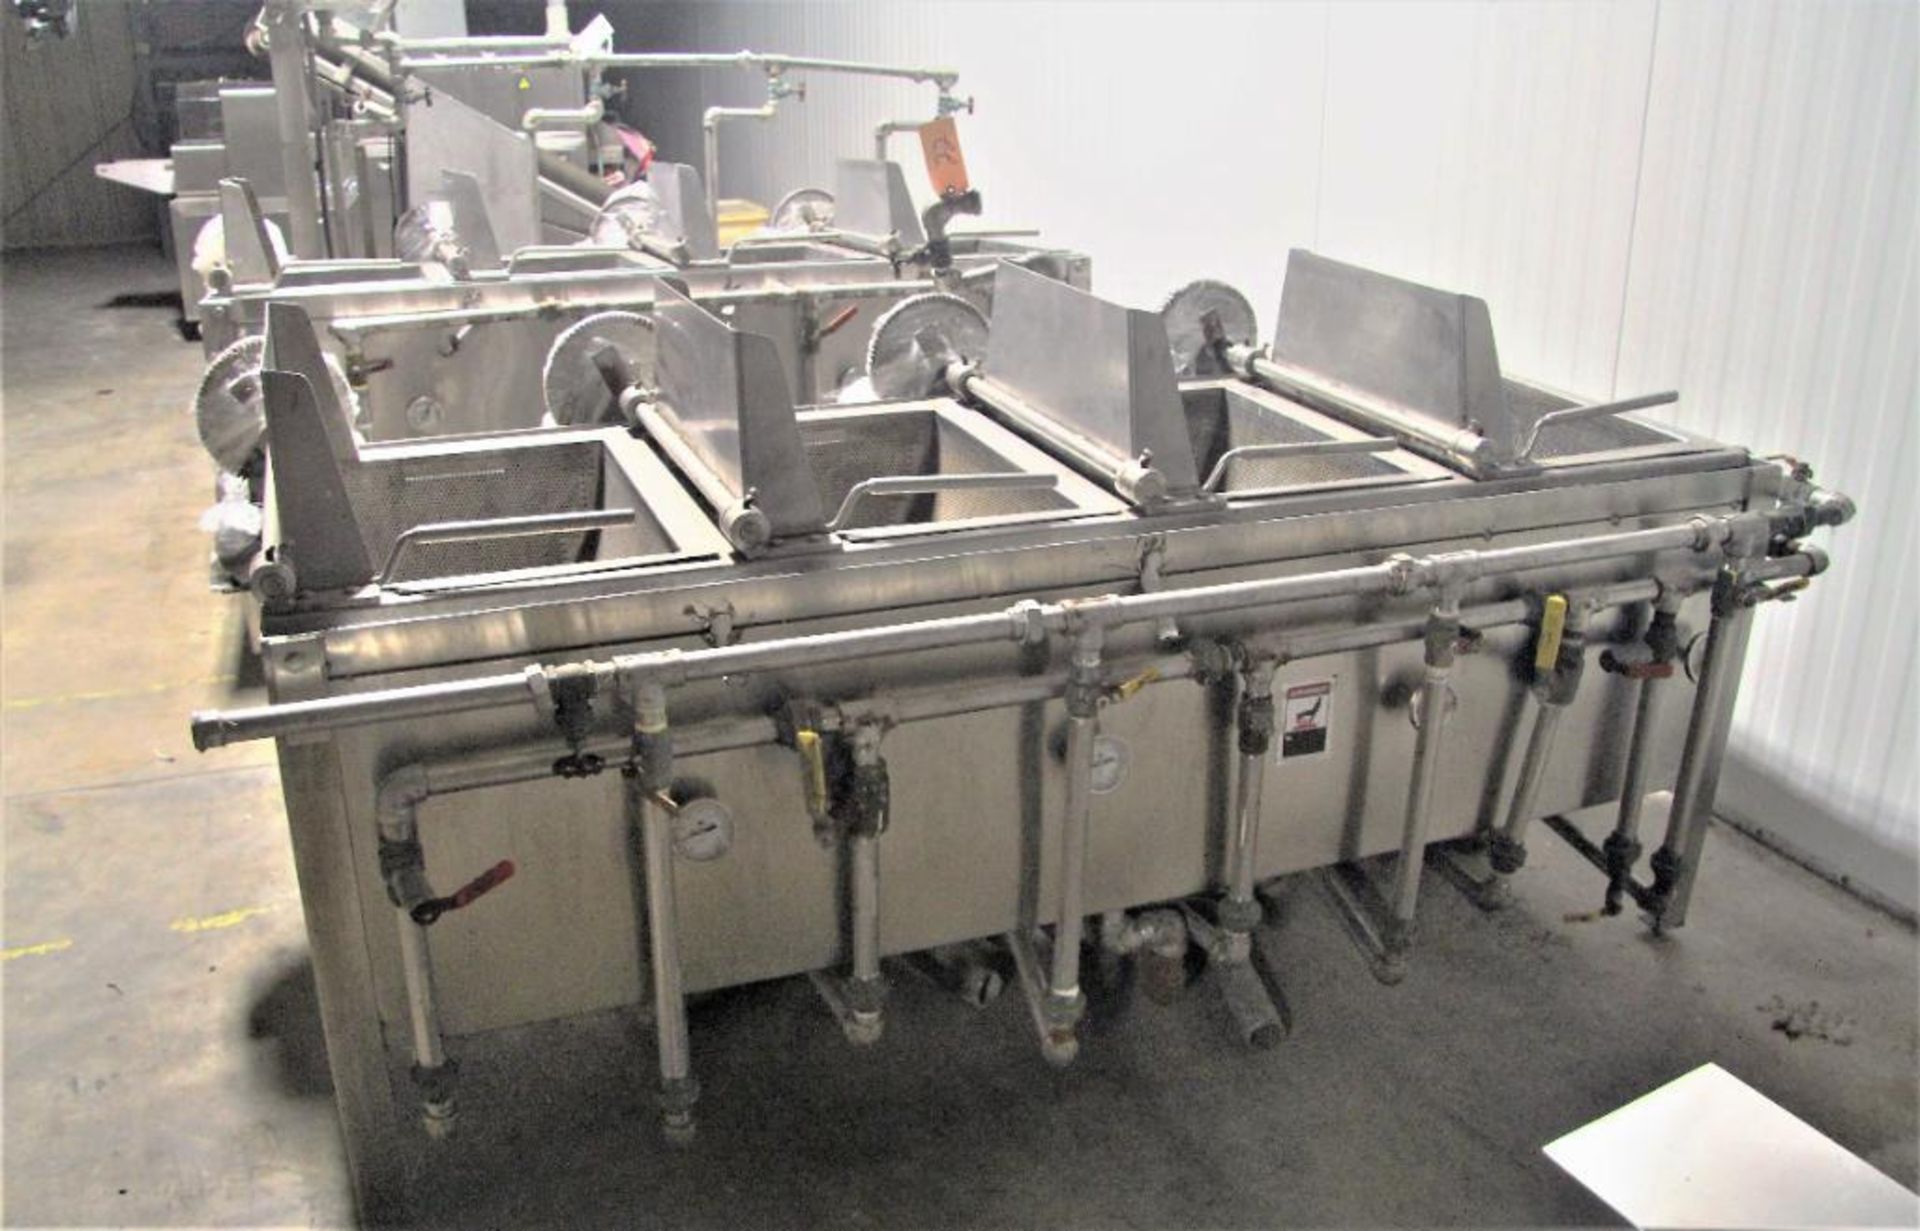 4-Station Stainless Steel Udon Noodle Cook Table With (4) Drain Dump Stations, (4) Temp Gages